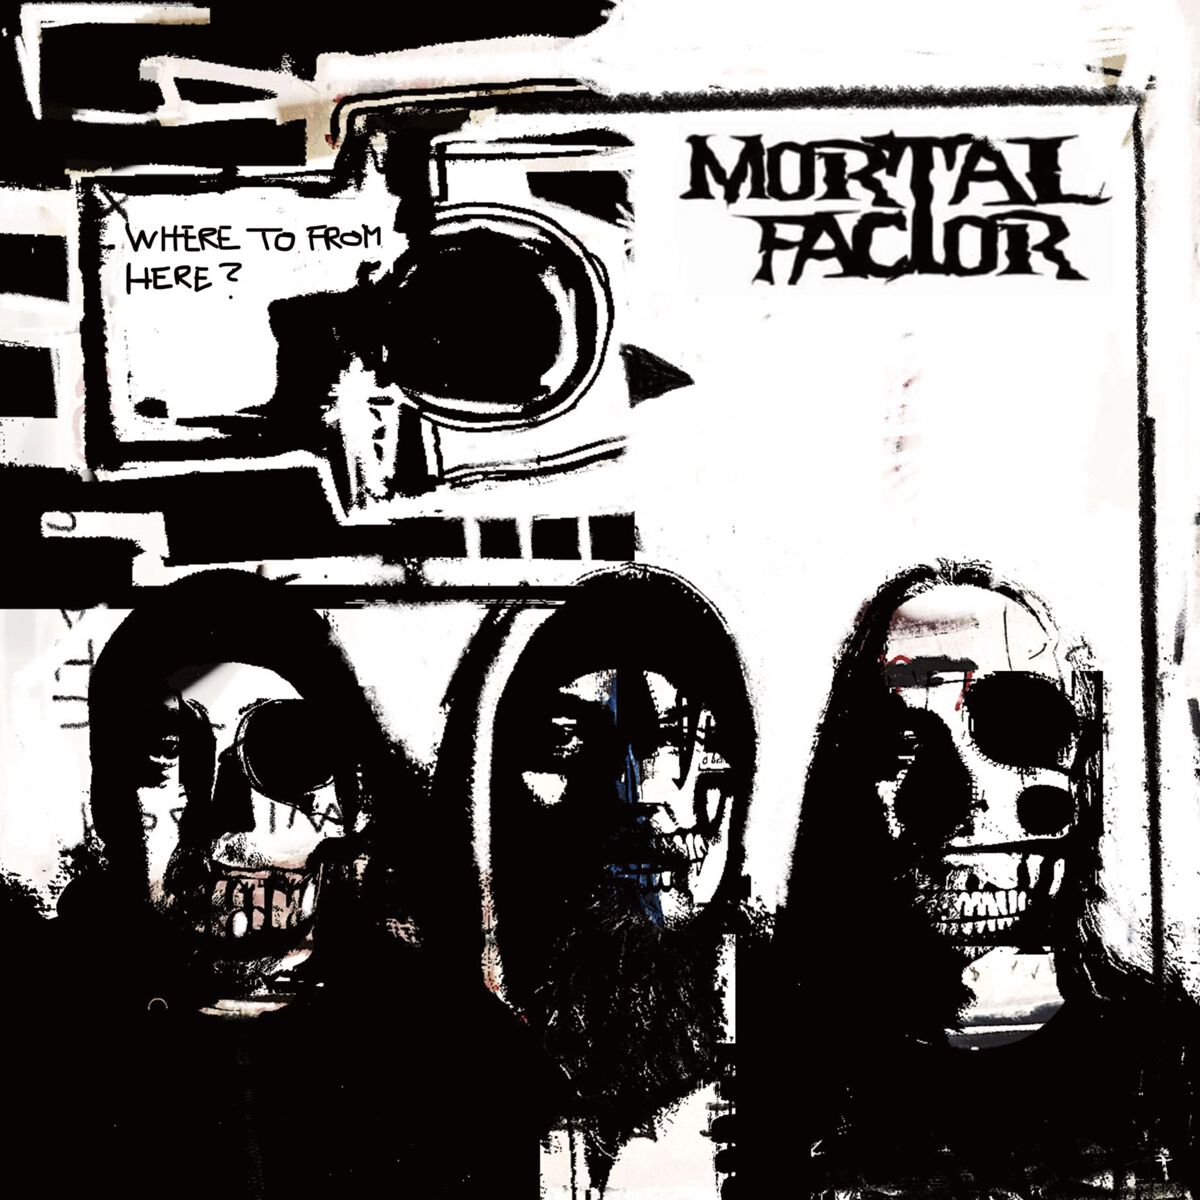 Mortal Factor Where To From Here? CD multicolor